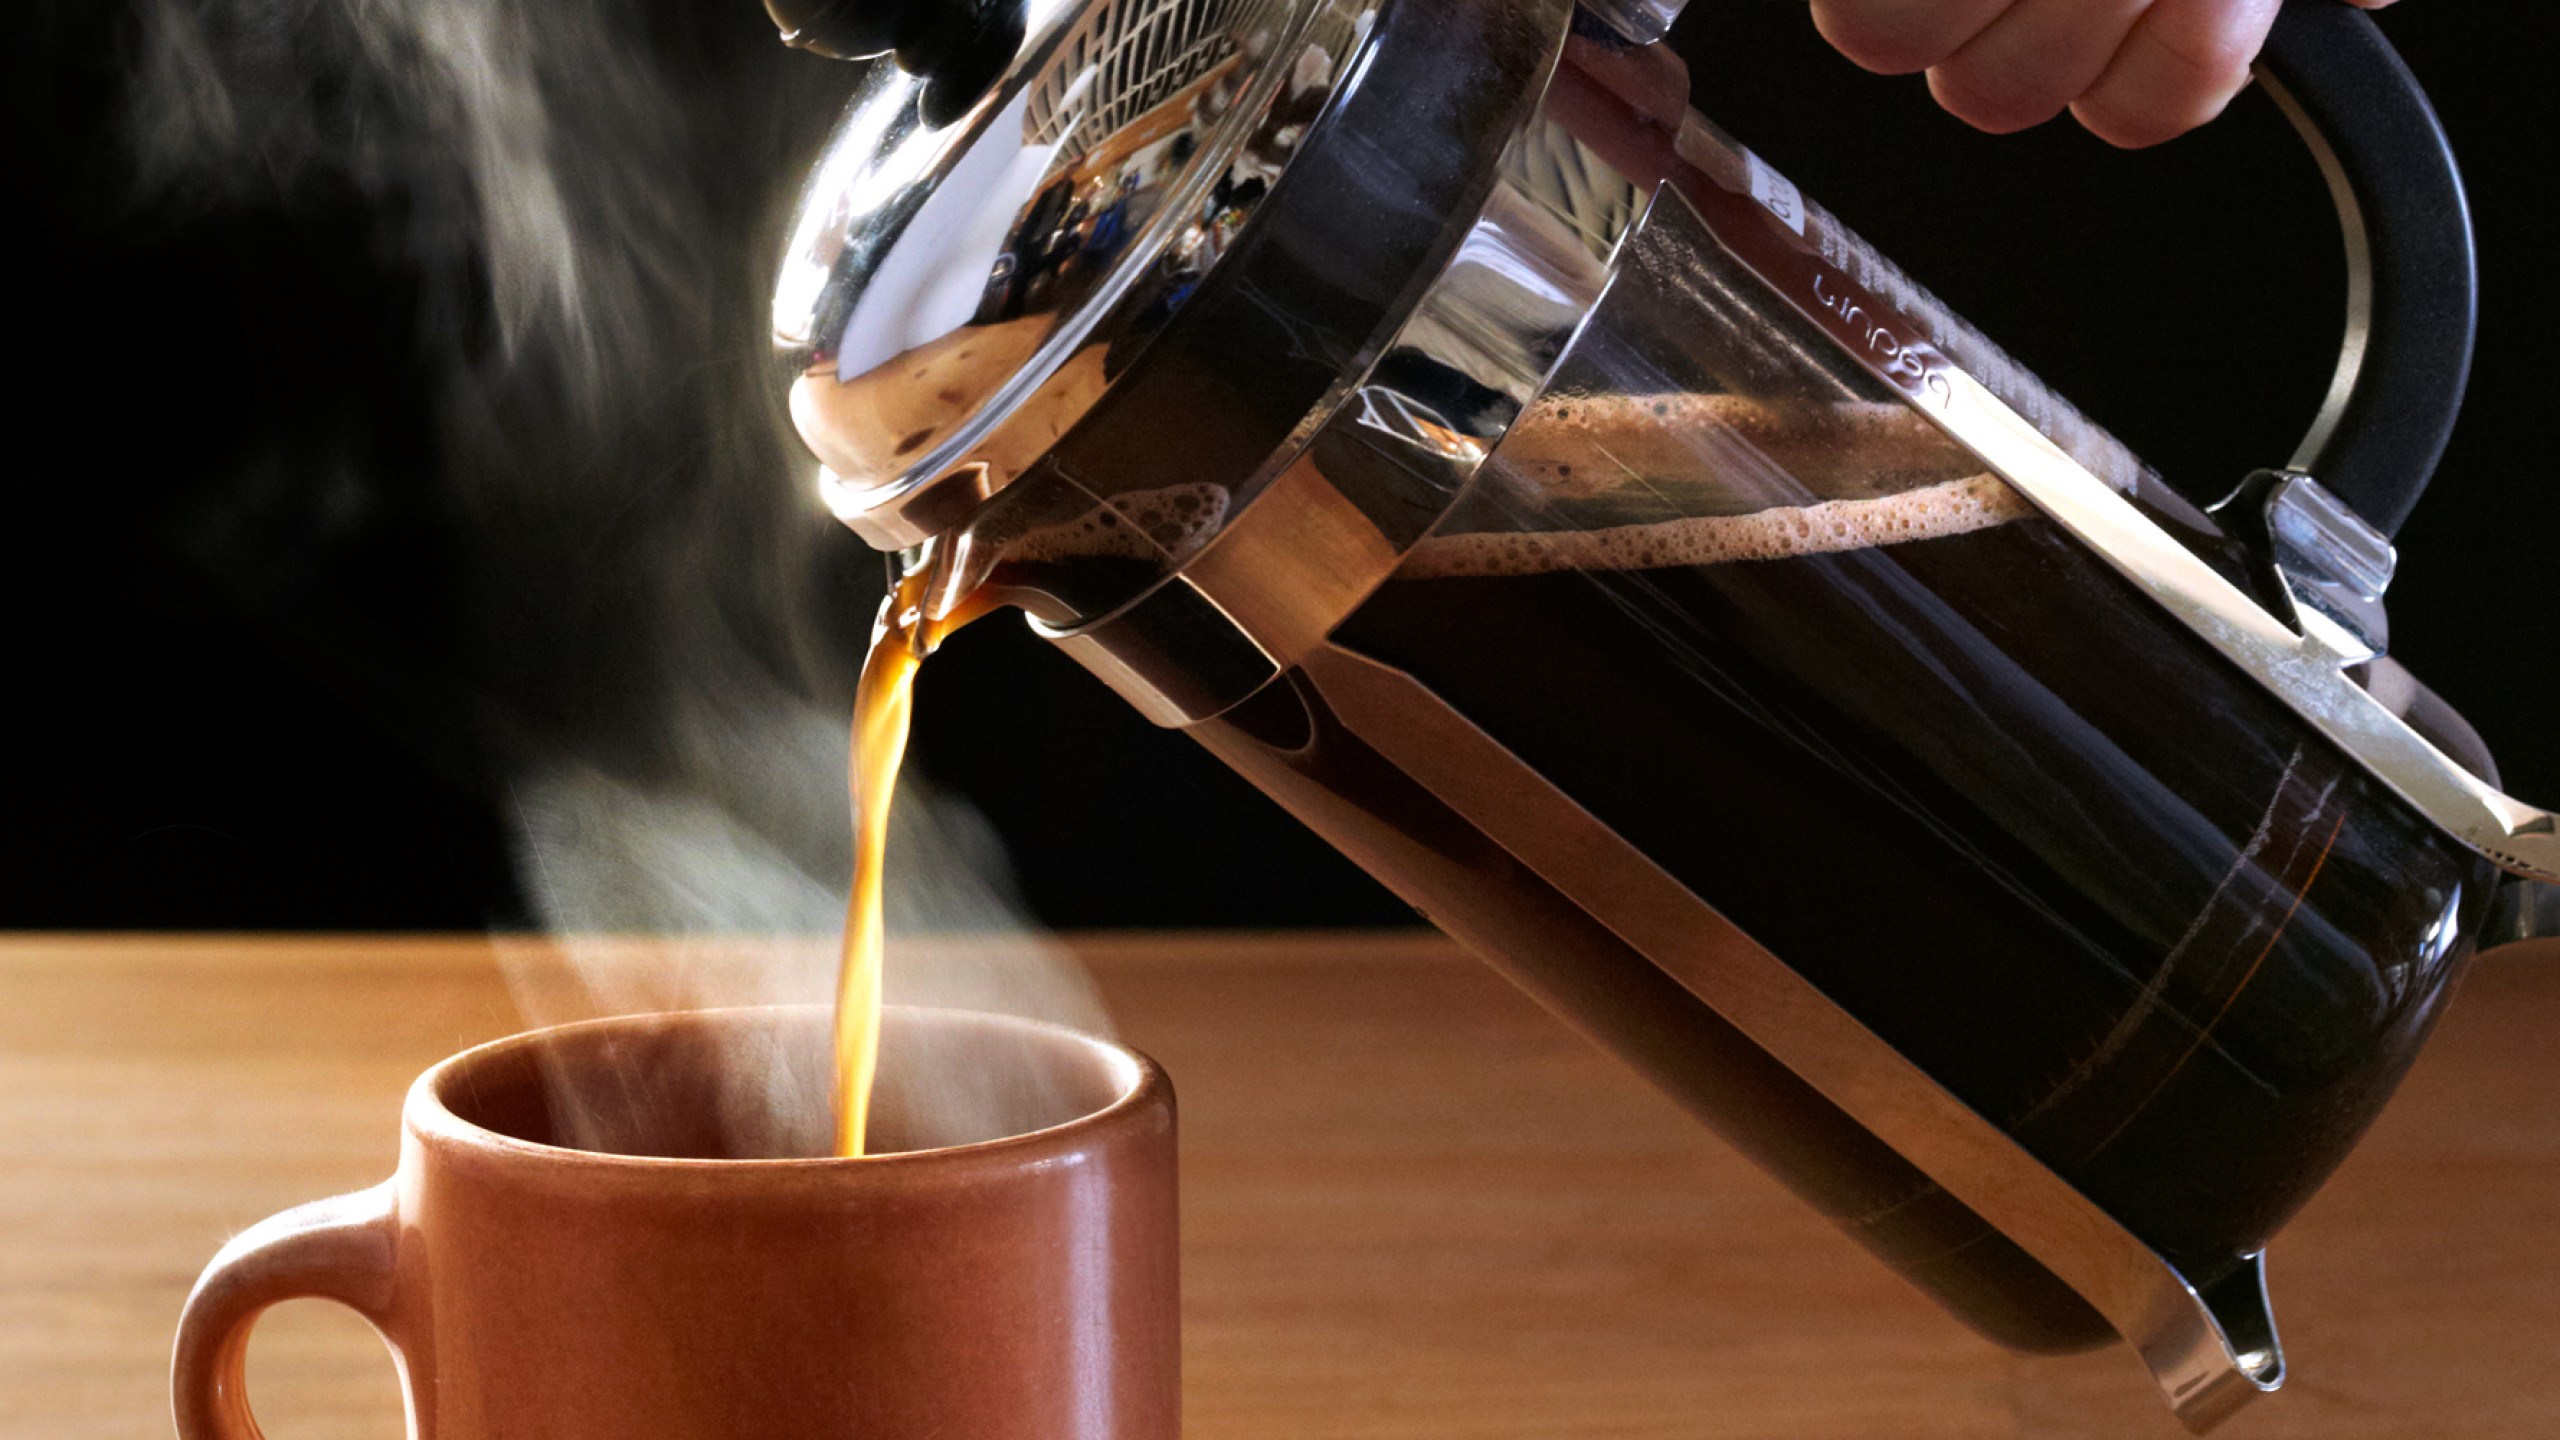 Tips for brewing the perfect cup of coffee at home